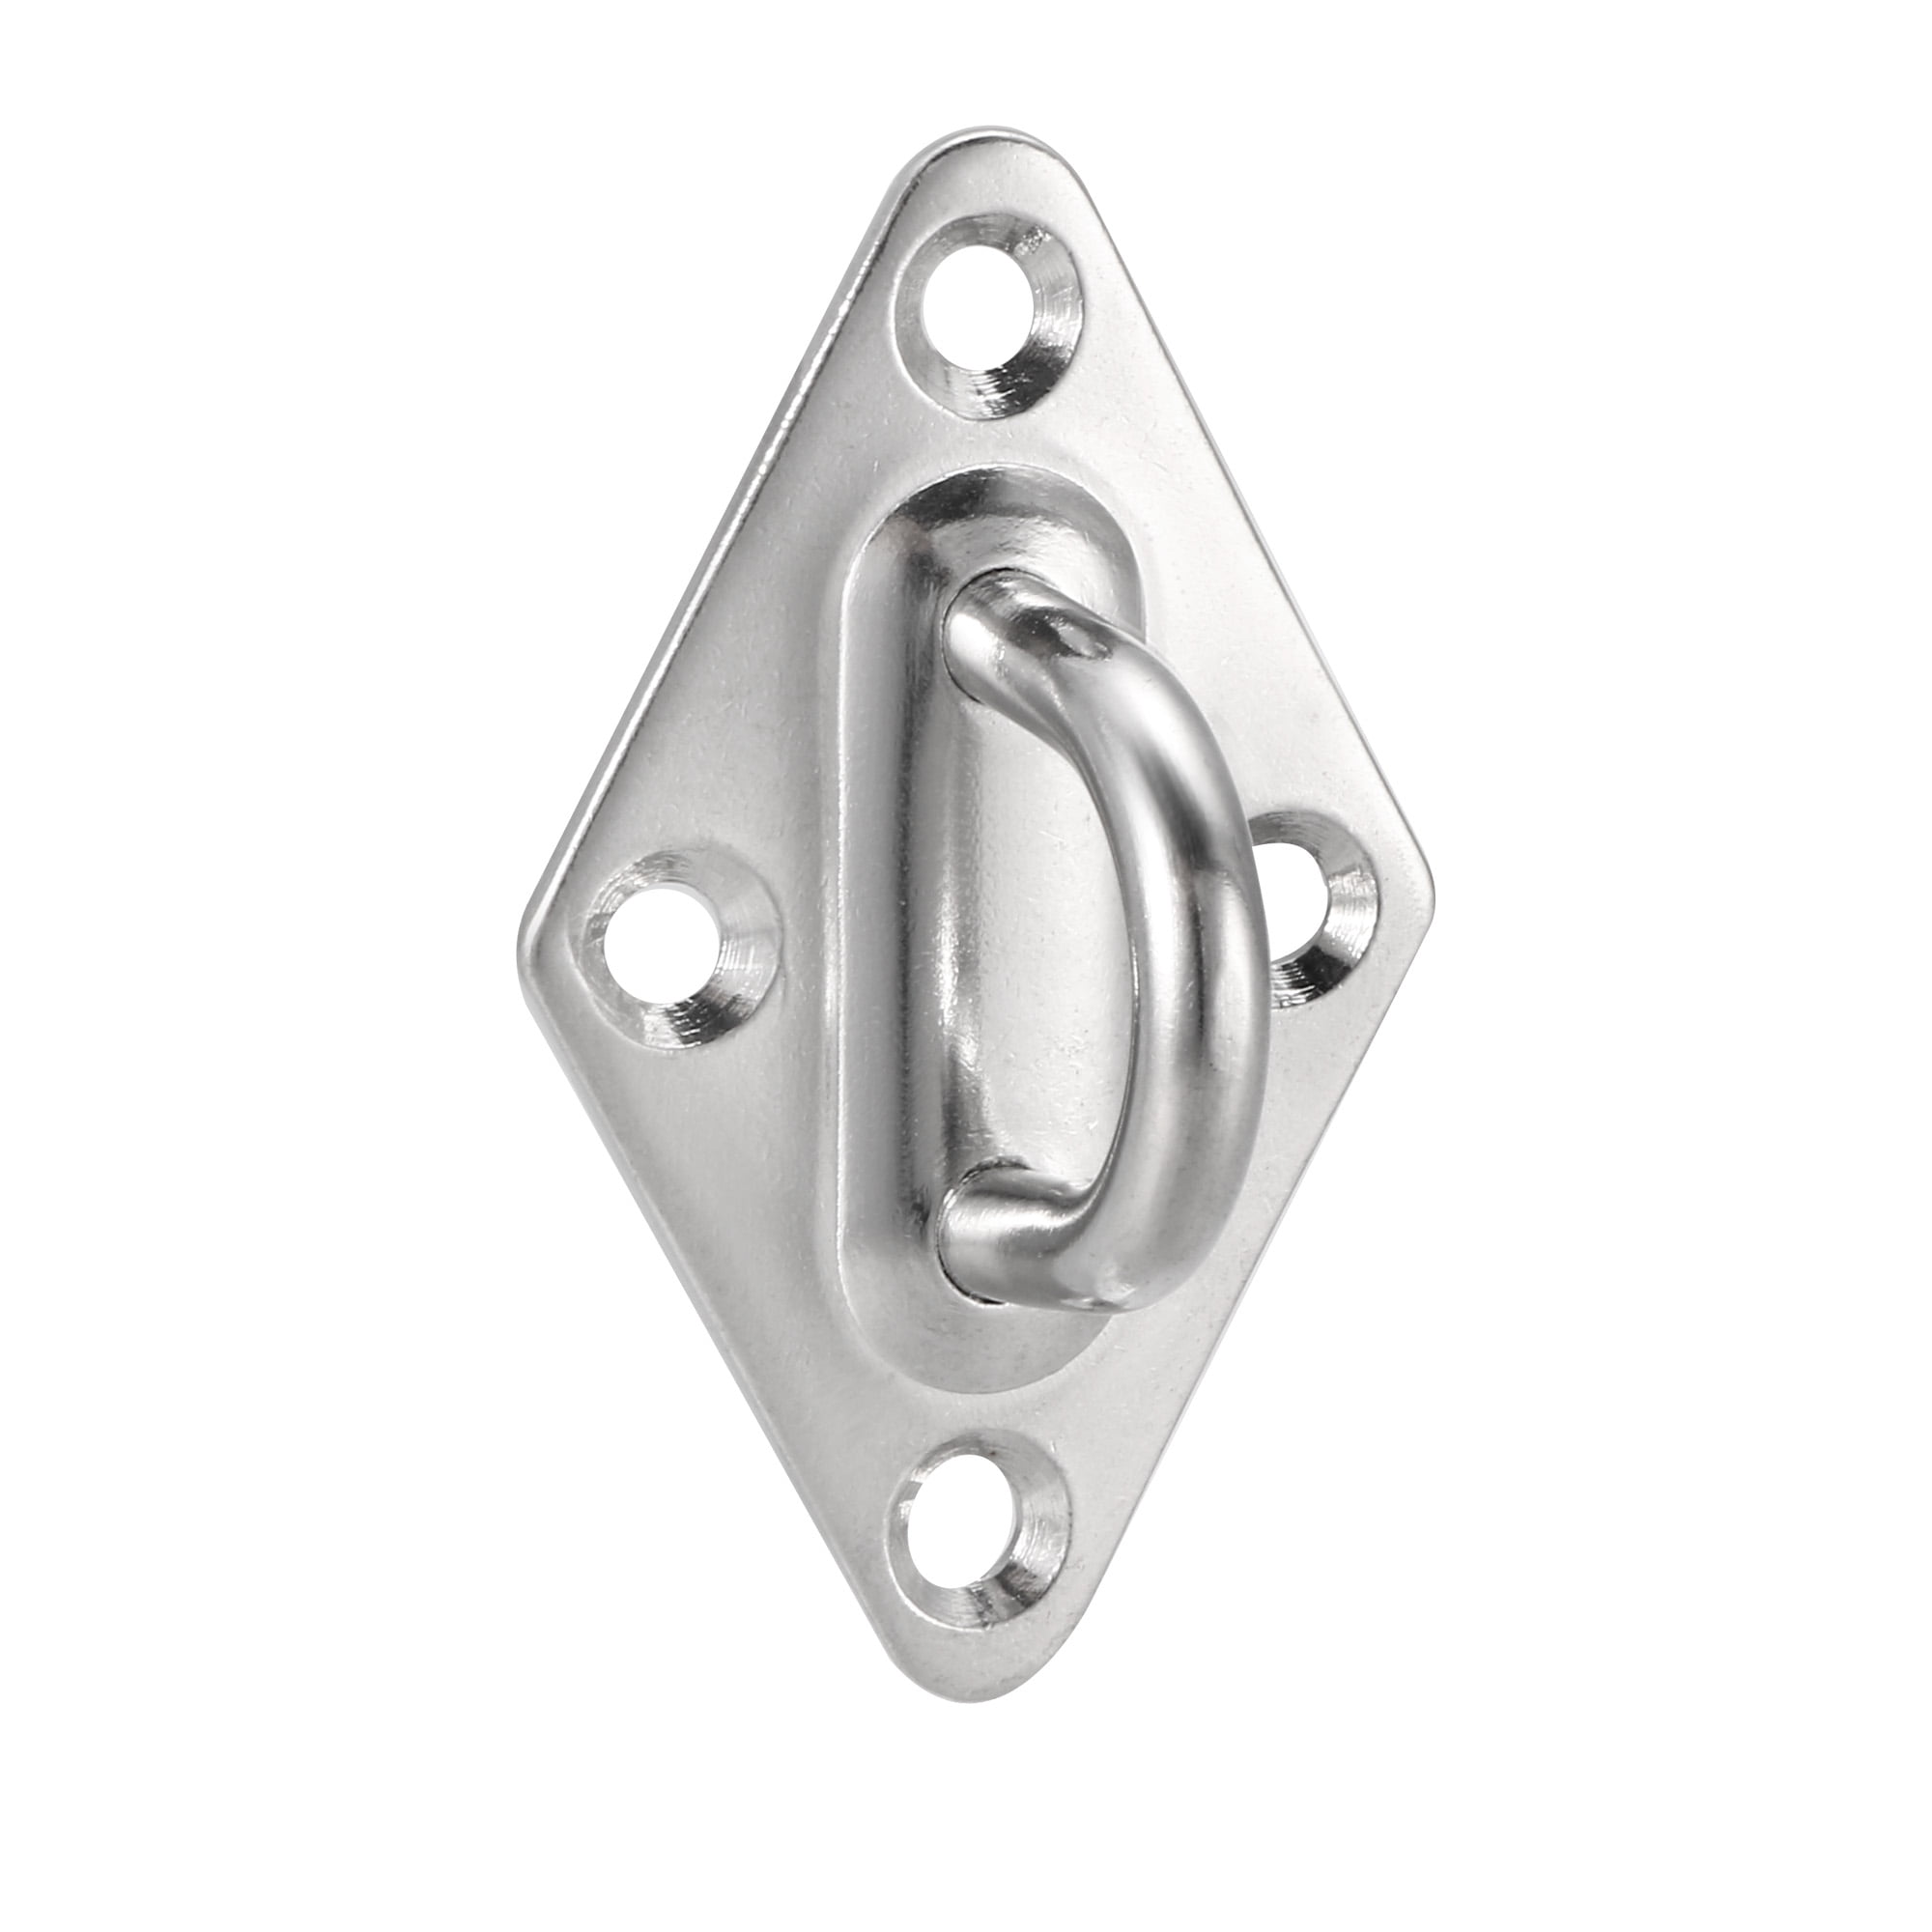 uxcell Stainless Steel Ceiling Hook with Ring Pad Eye Plate Hardware 65mmX40mm Staple Hooks Loop Wall Mount 